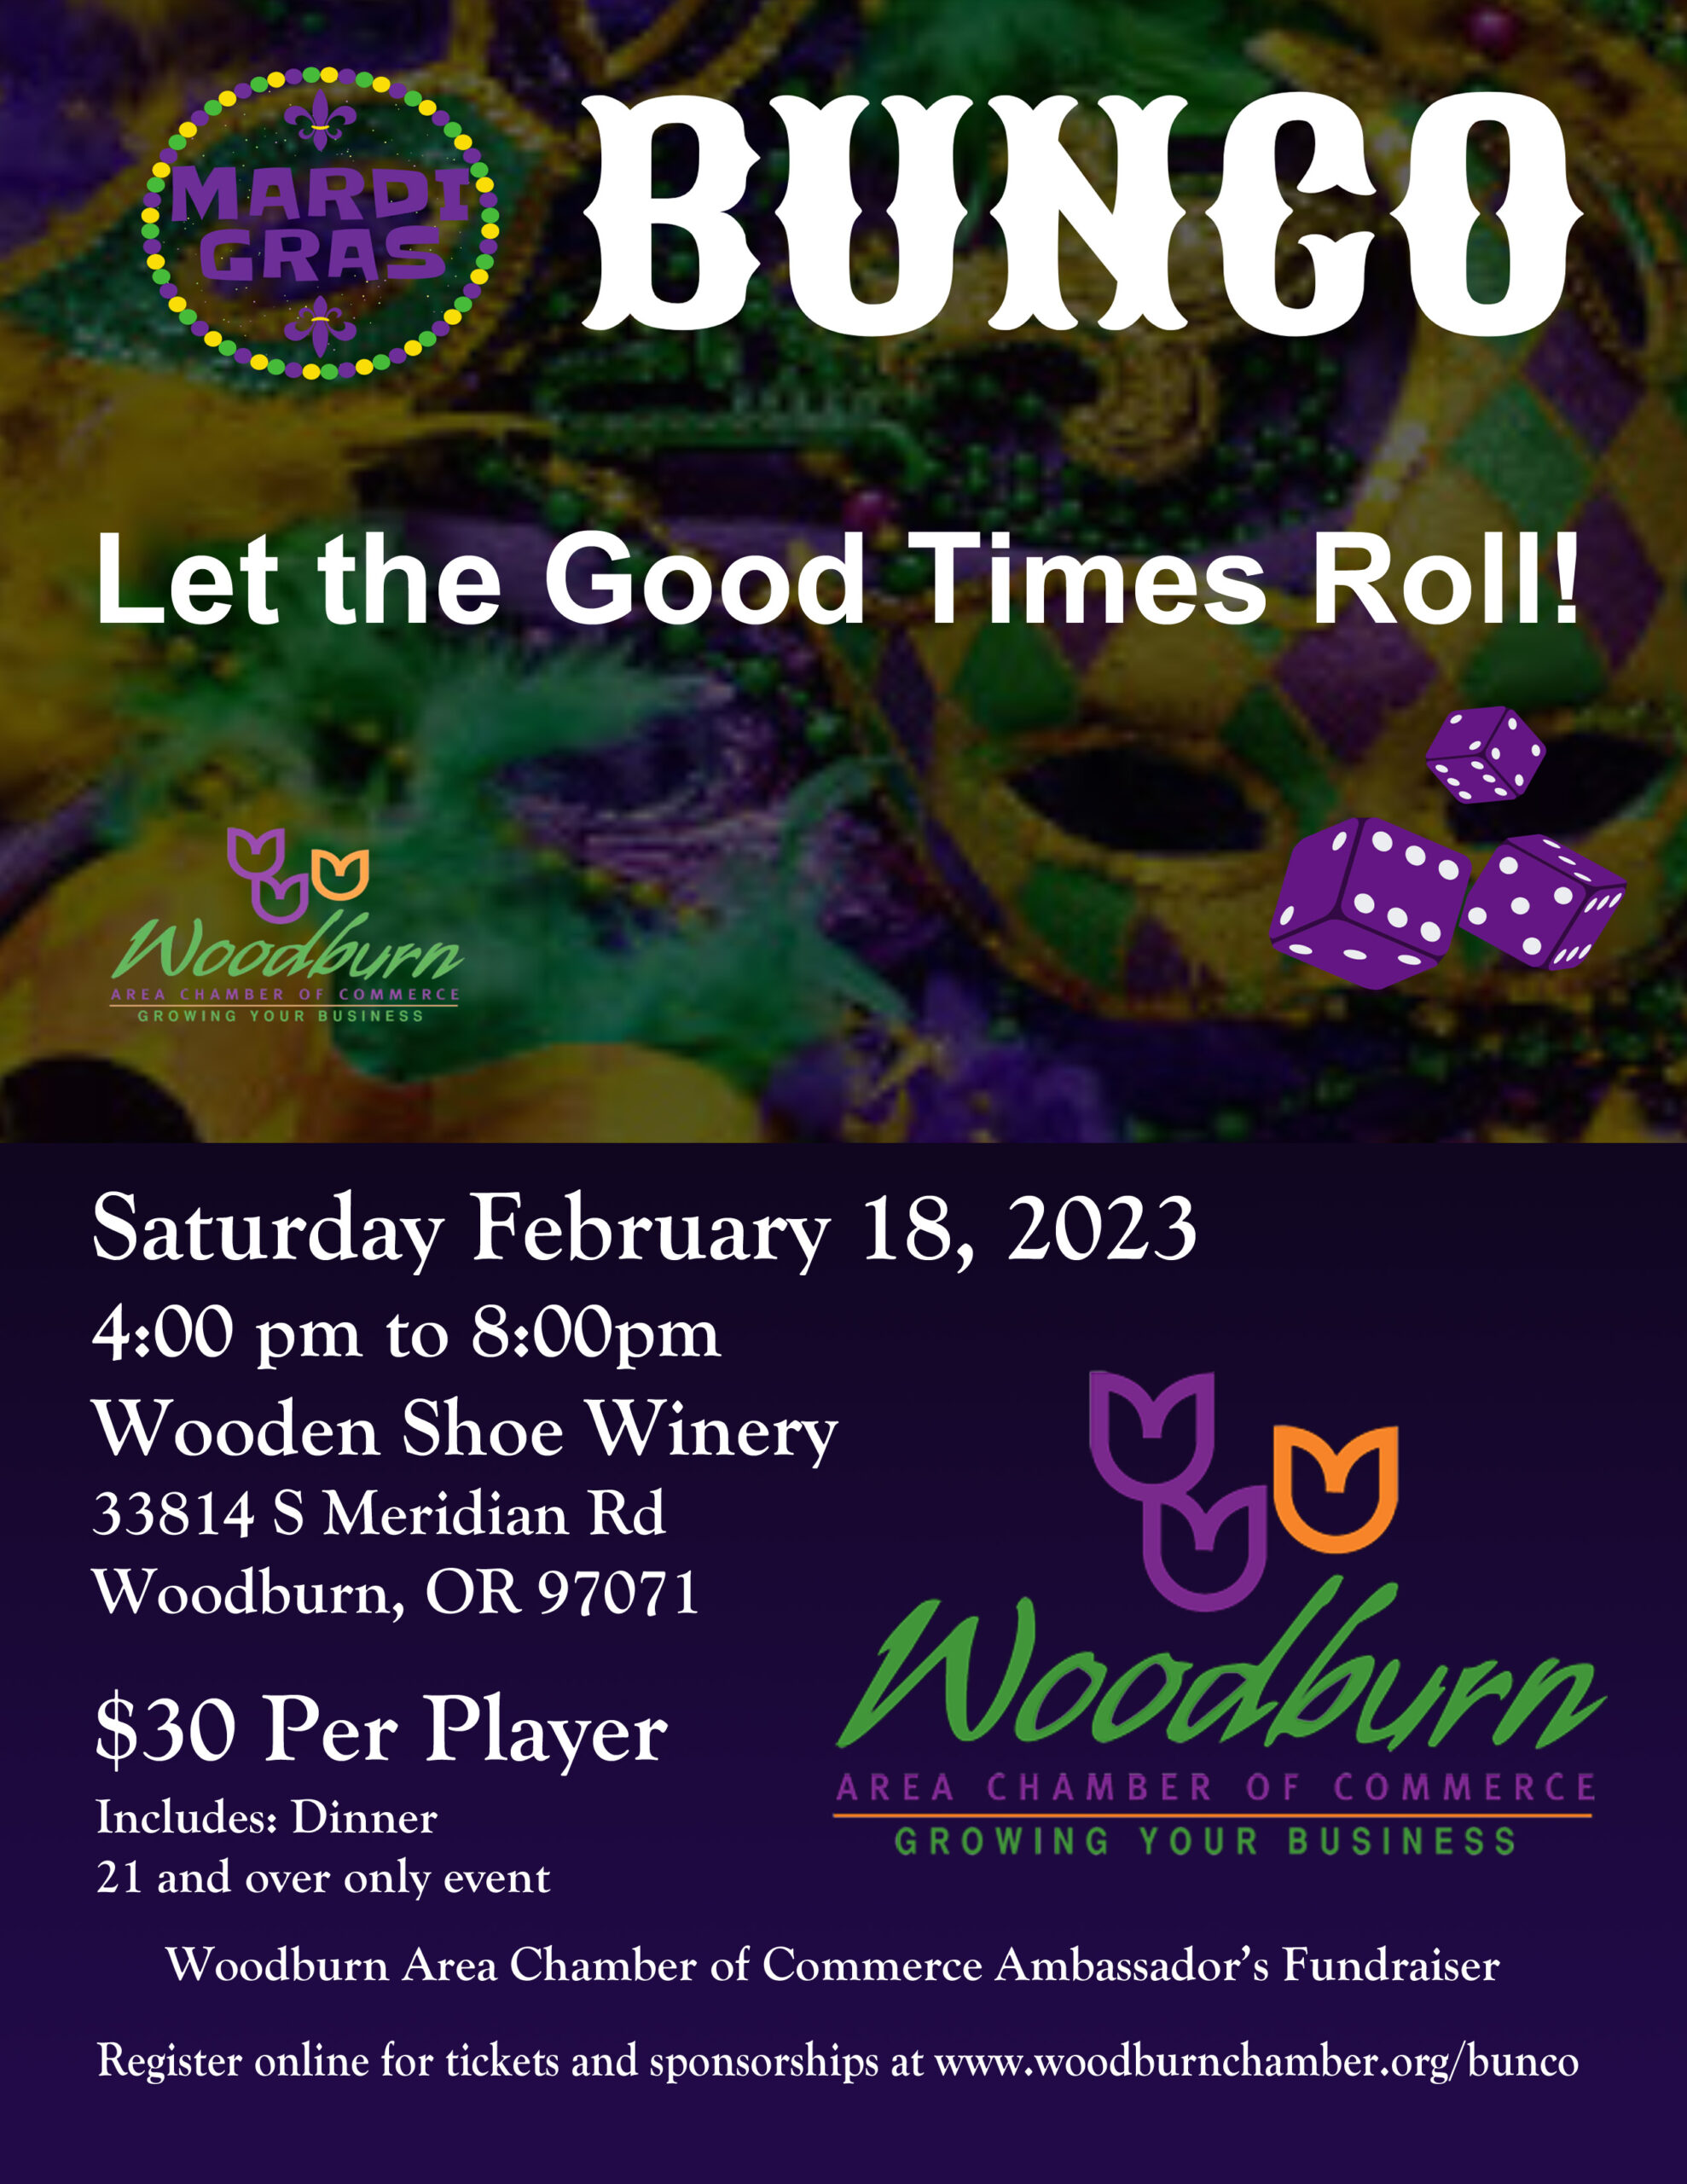 Paint the town red flyer for Woodburn Chamber of Commerce's 2022 Bunco Night